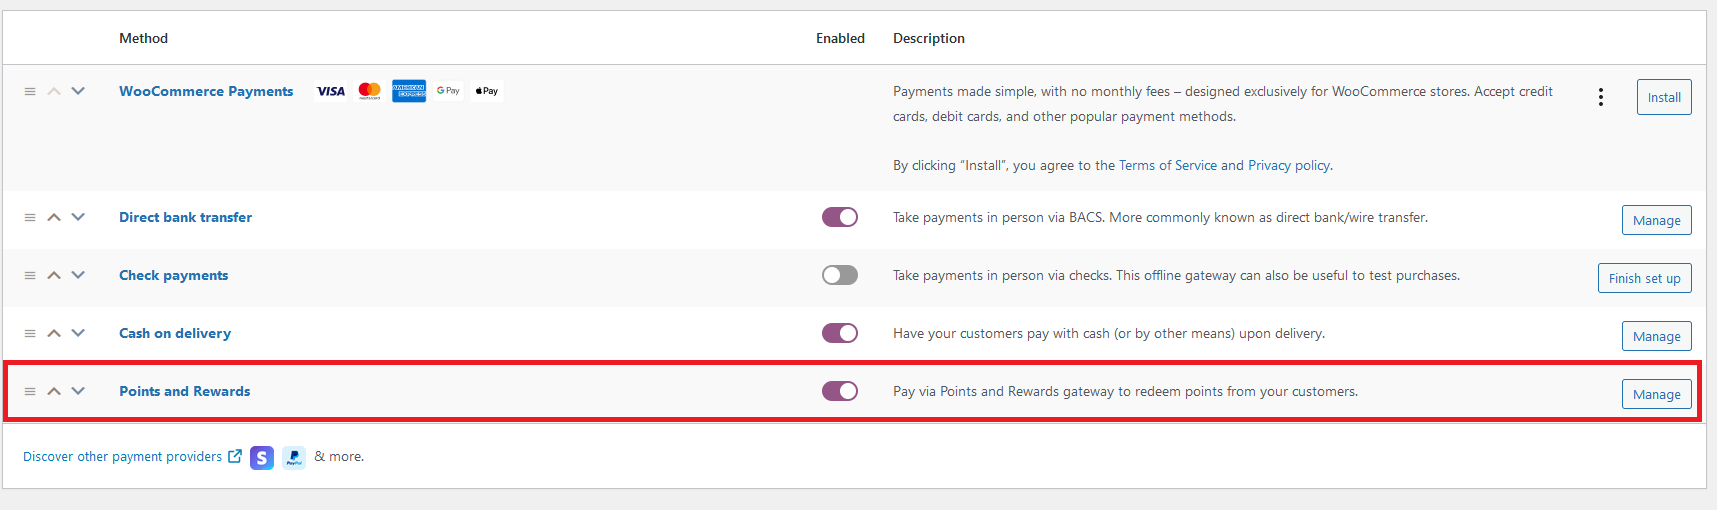 Enhancements for WooCommerce Points and Rewards - 11